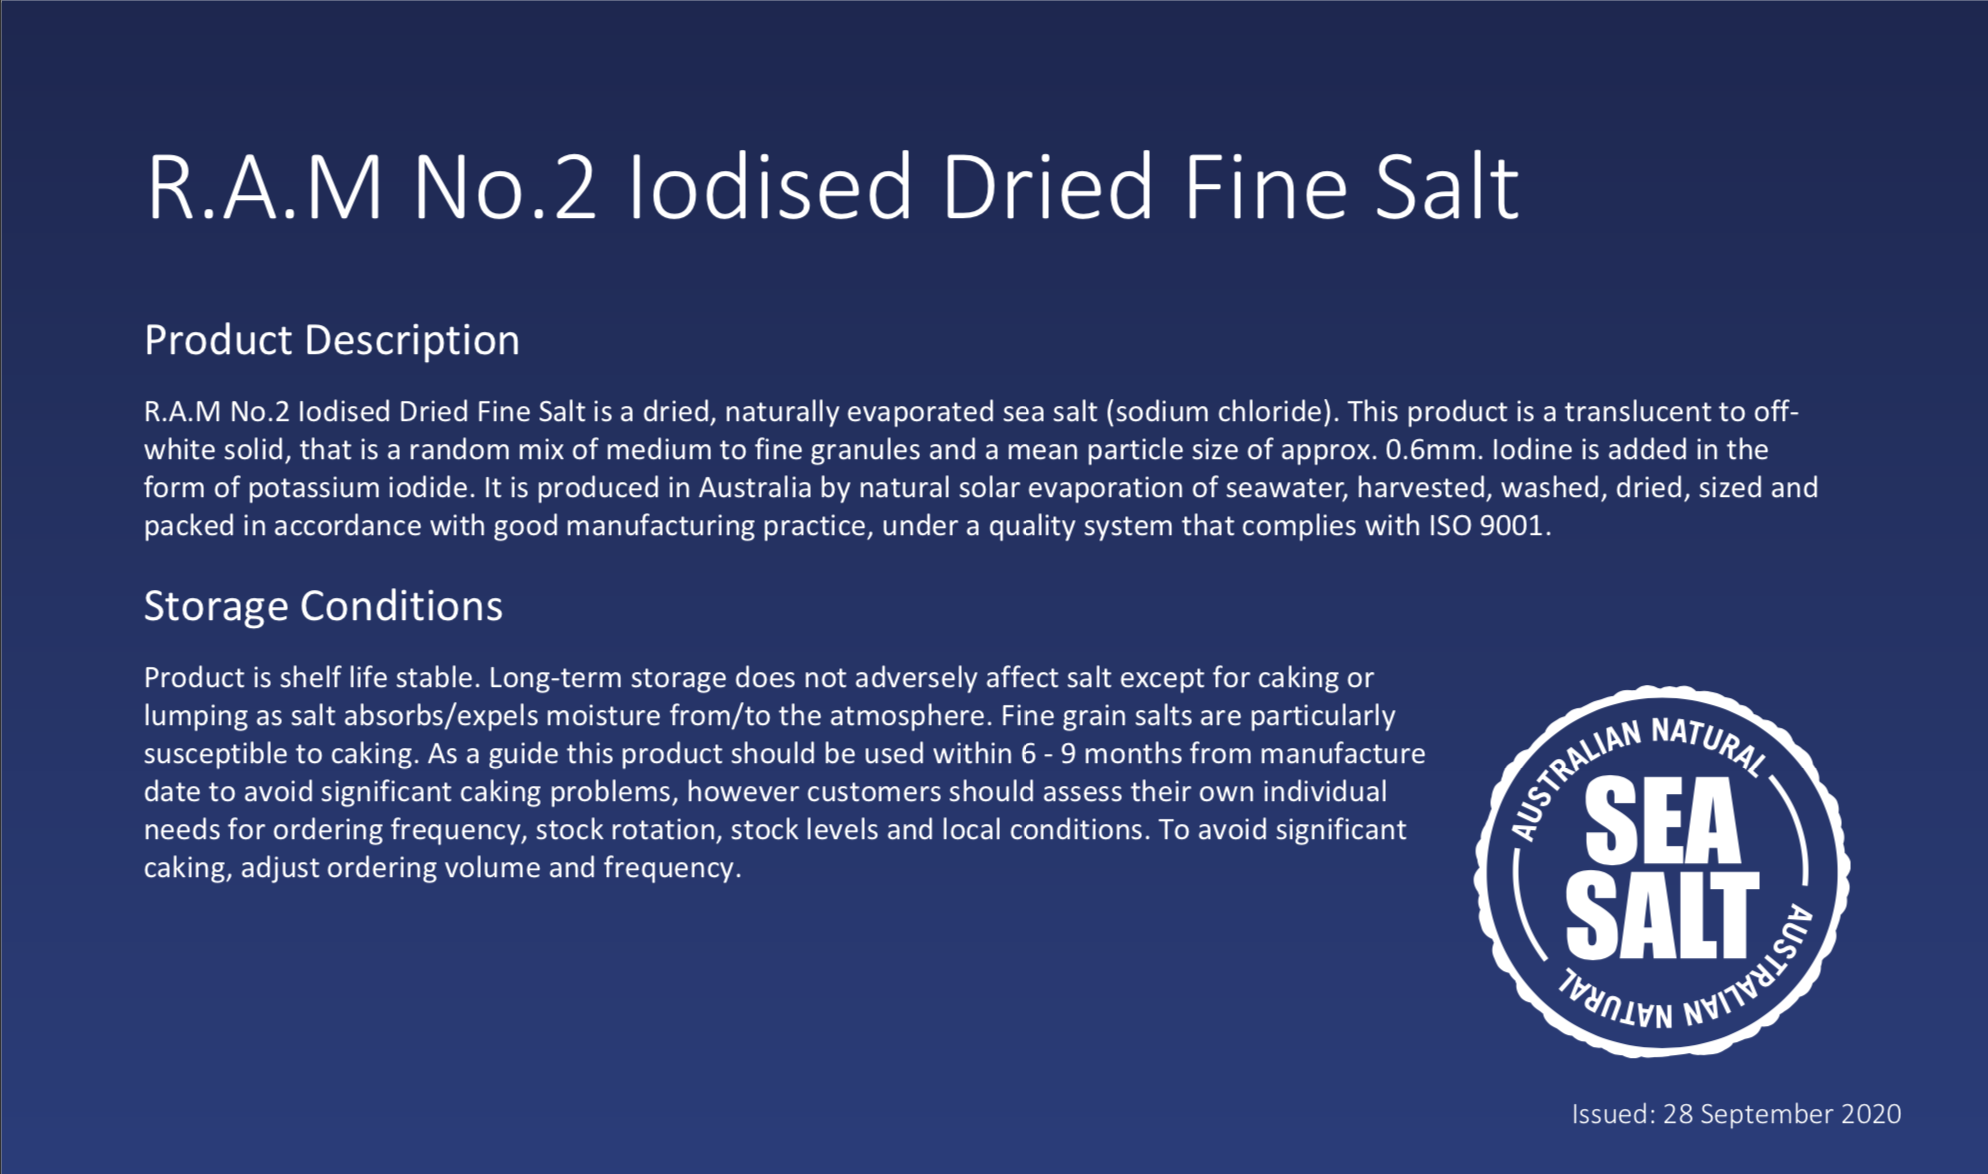 R.A.M. No.2 Iodised Dried Fine Salt product description. The product description includes information about storage conditions and how to use salt for stock feed. The product description includes a seal with text that reads 